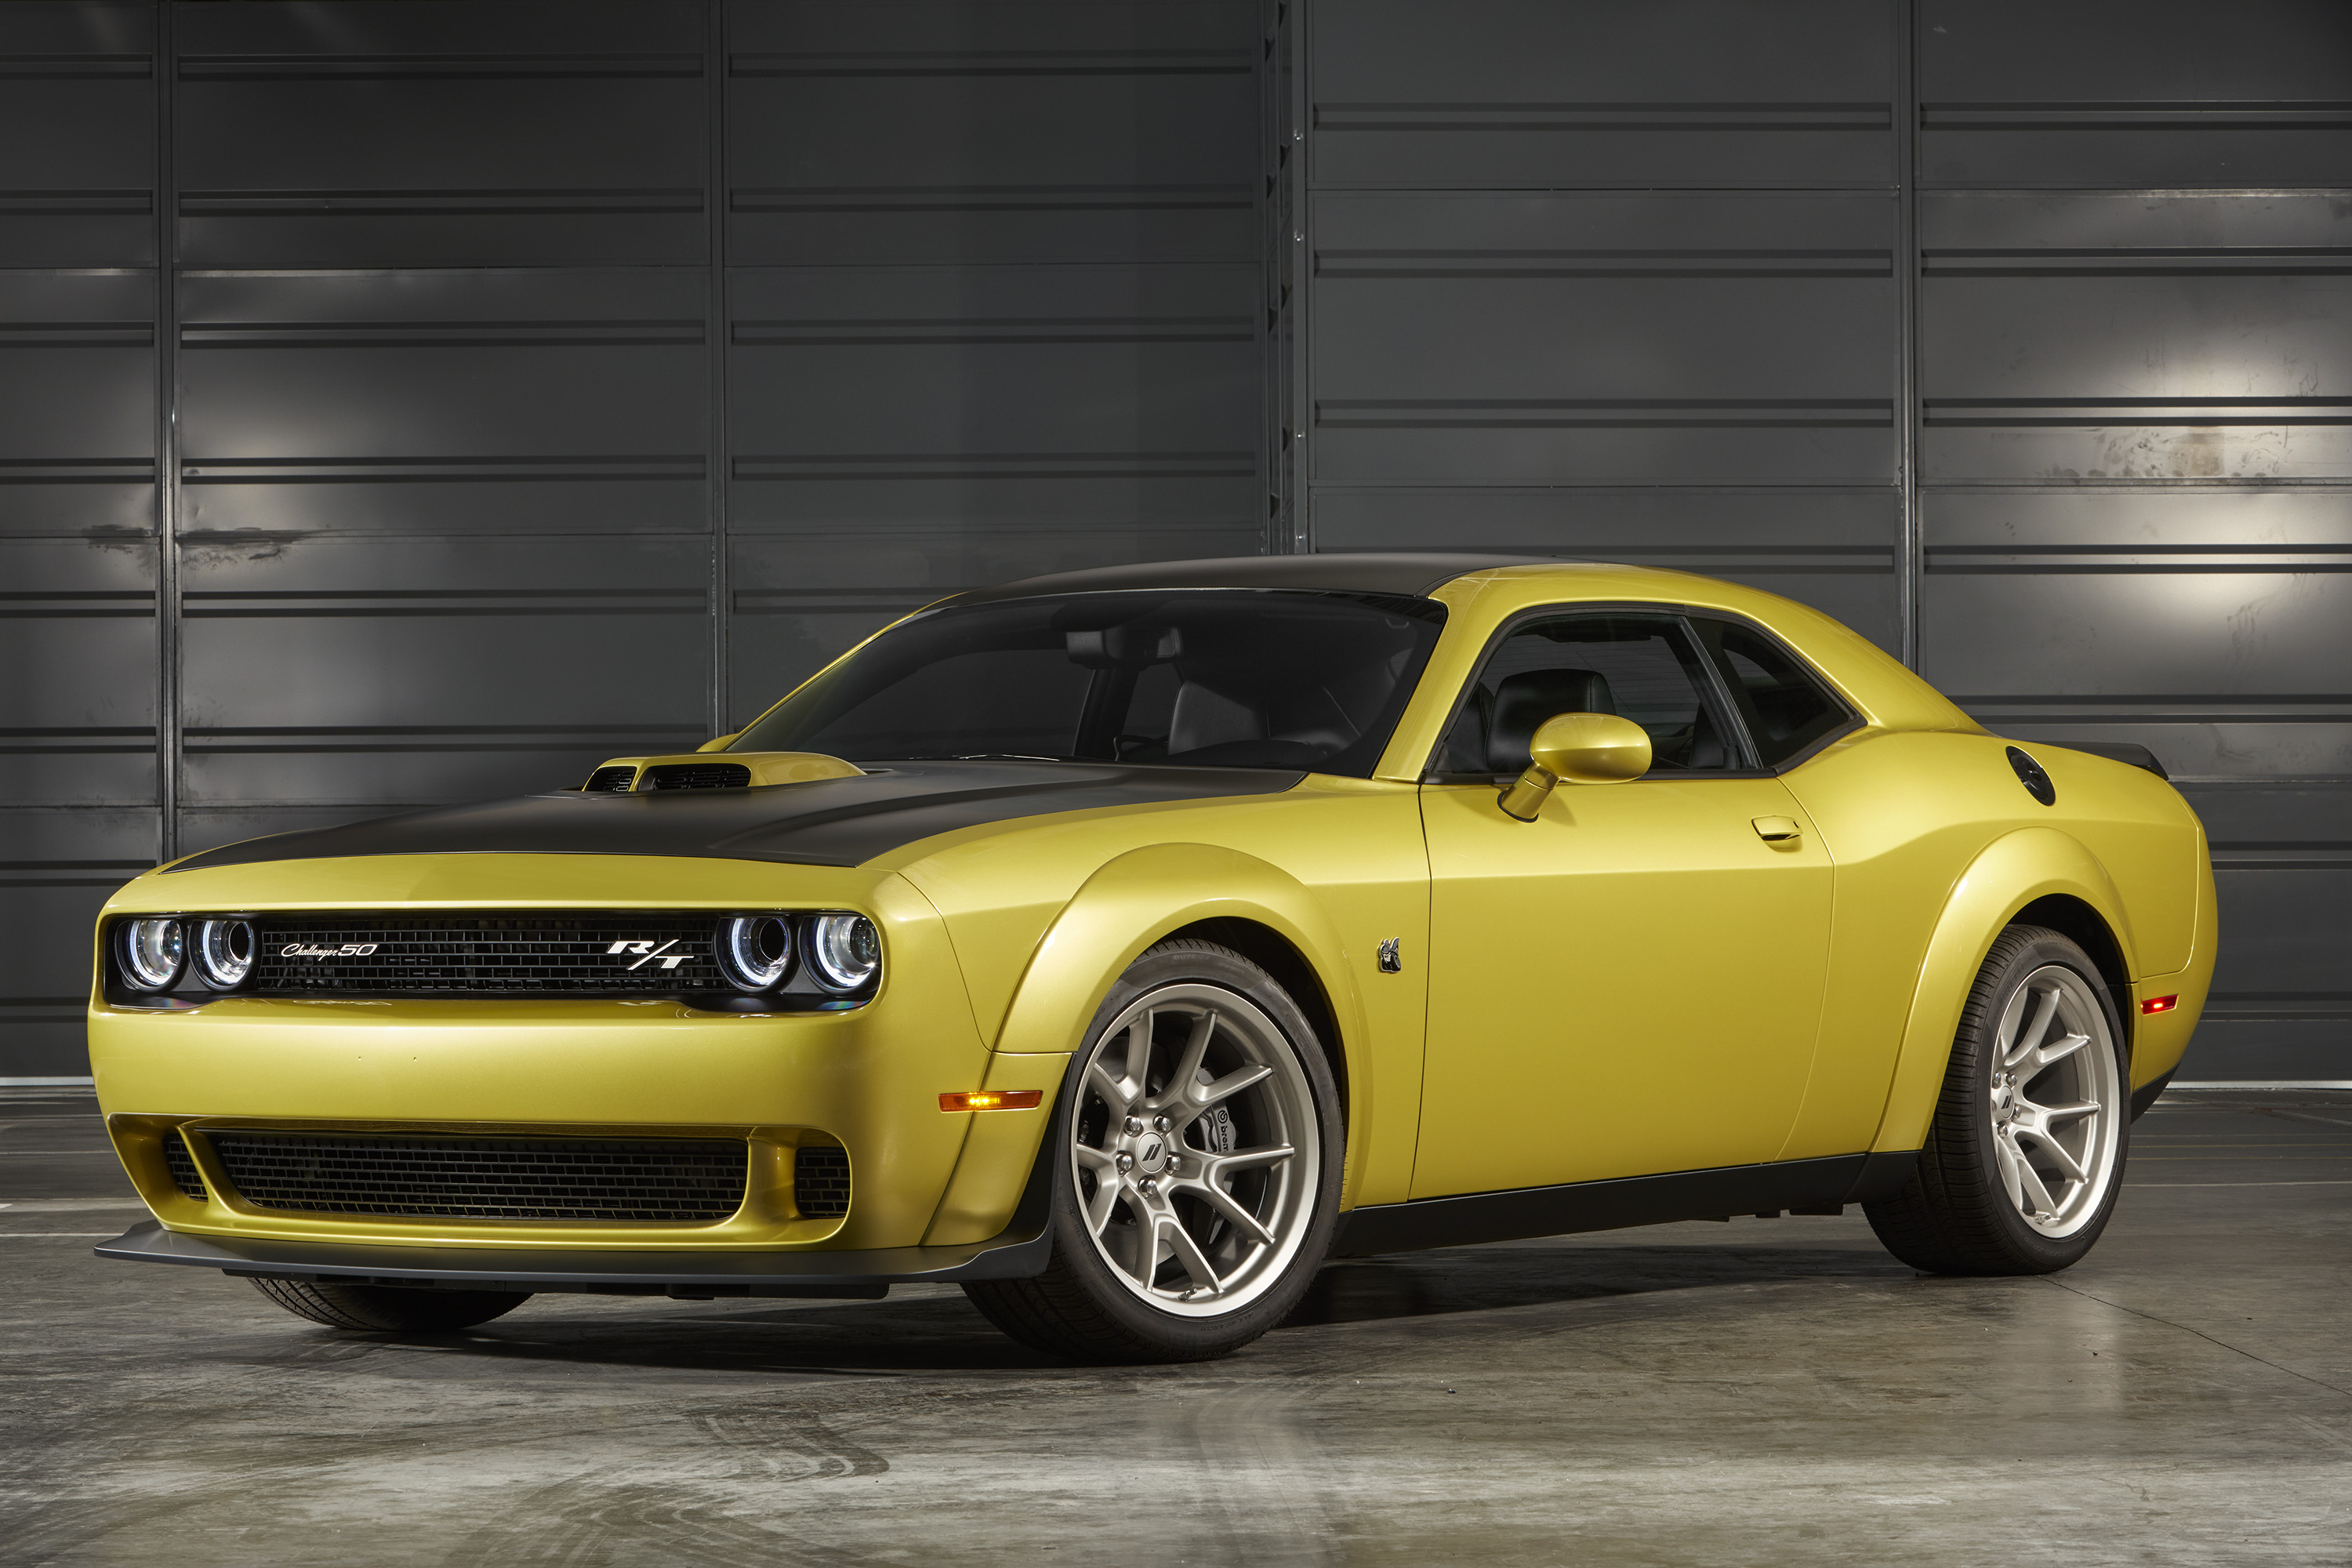 Car Dodge Dodge Challenger Muscle Car Vehicle Yellow Car 3000x2000